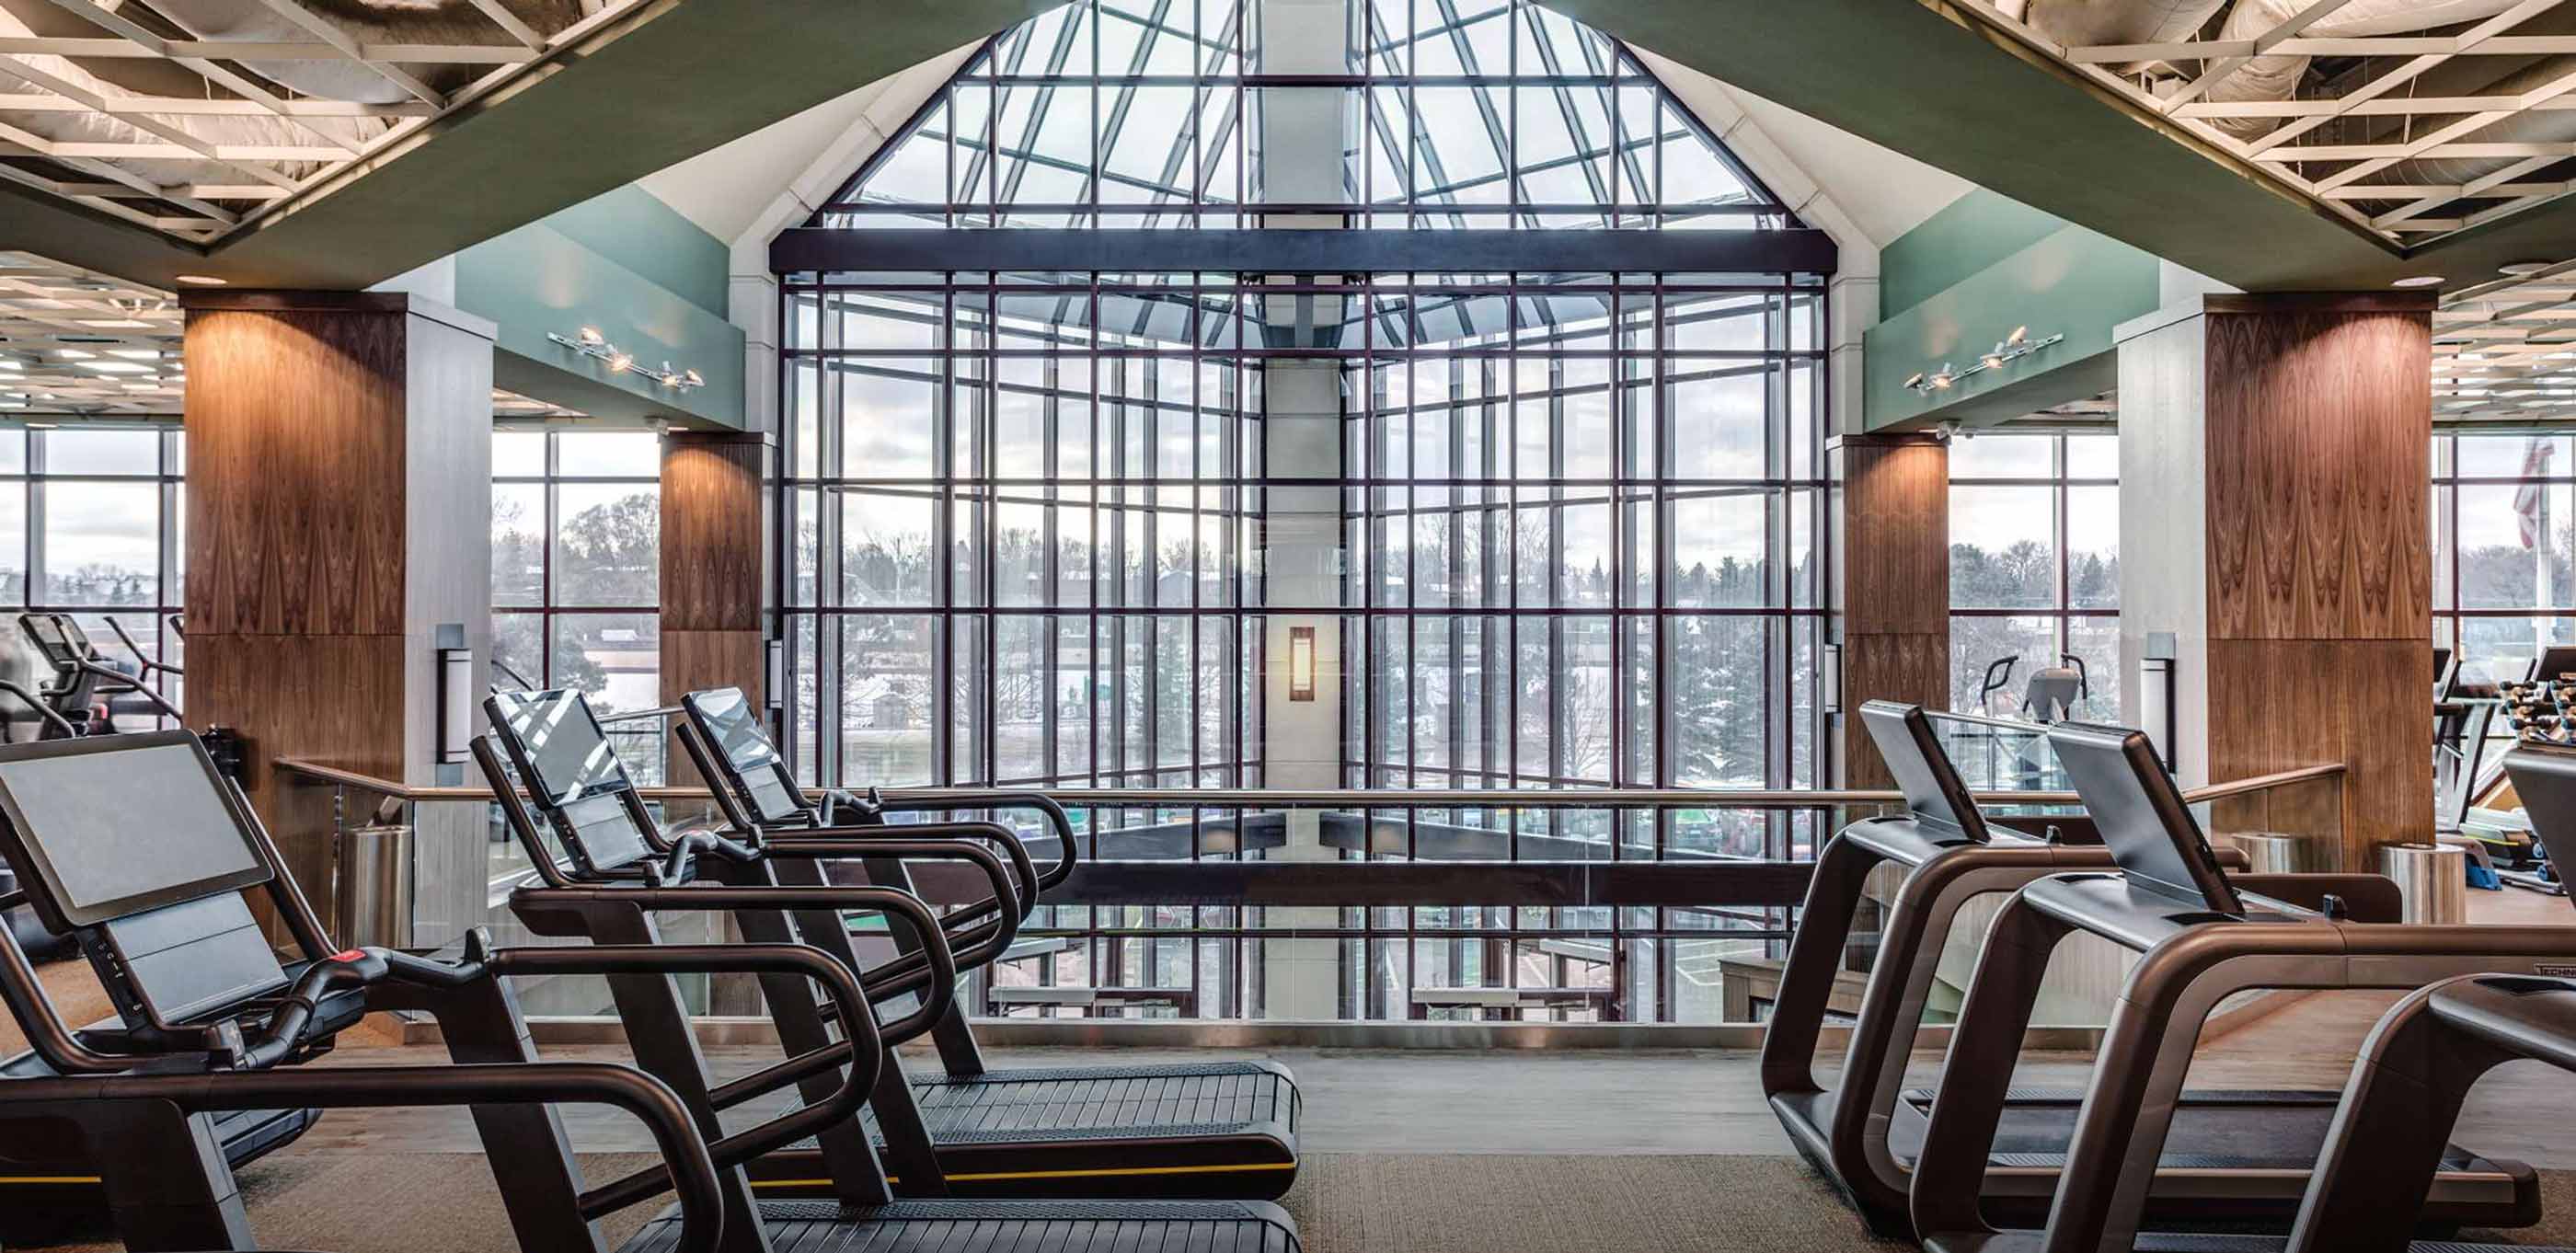 cardio workout machines in a row underneath a glass atrium